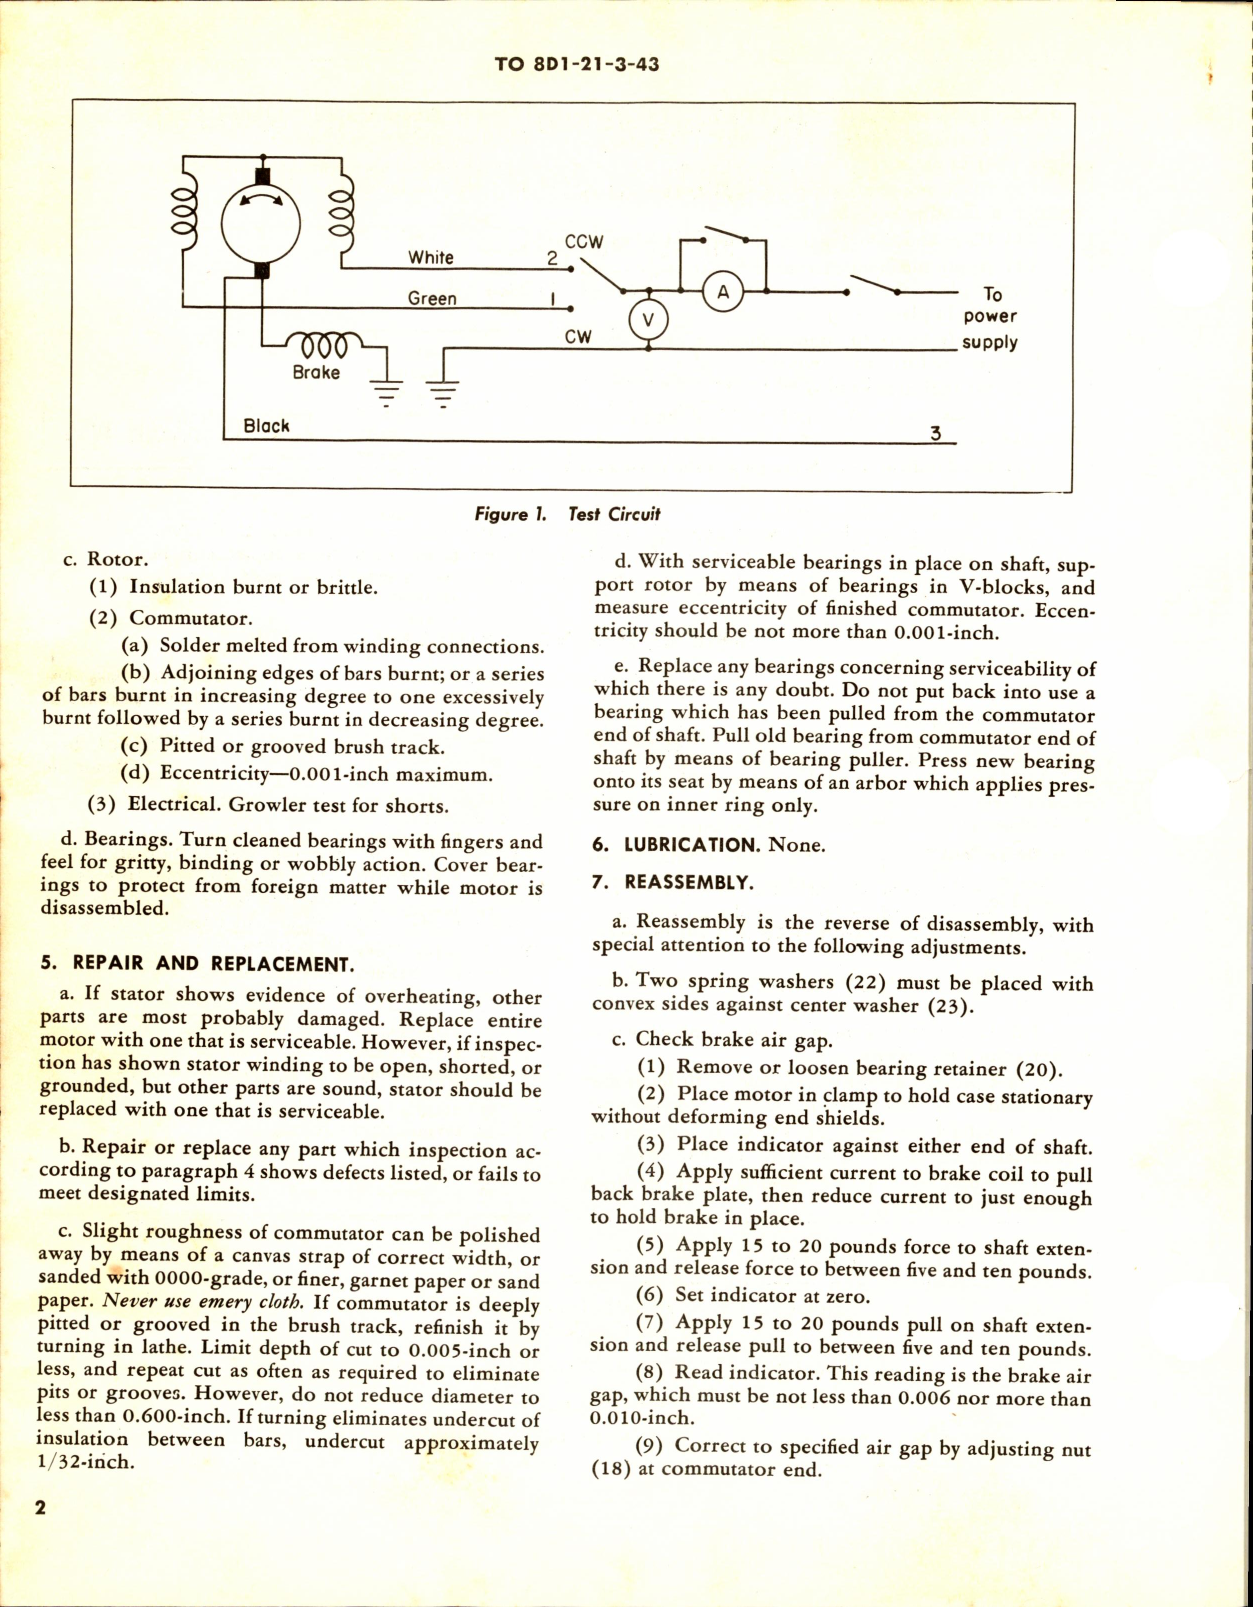 Sample page 2 from AirCorps Library document: Overhaul Instructions with Parts Breakdown for Fractional Horsepower Motor Model 5BA25HJ102